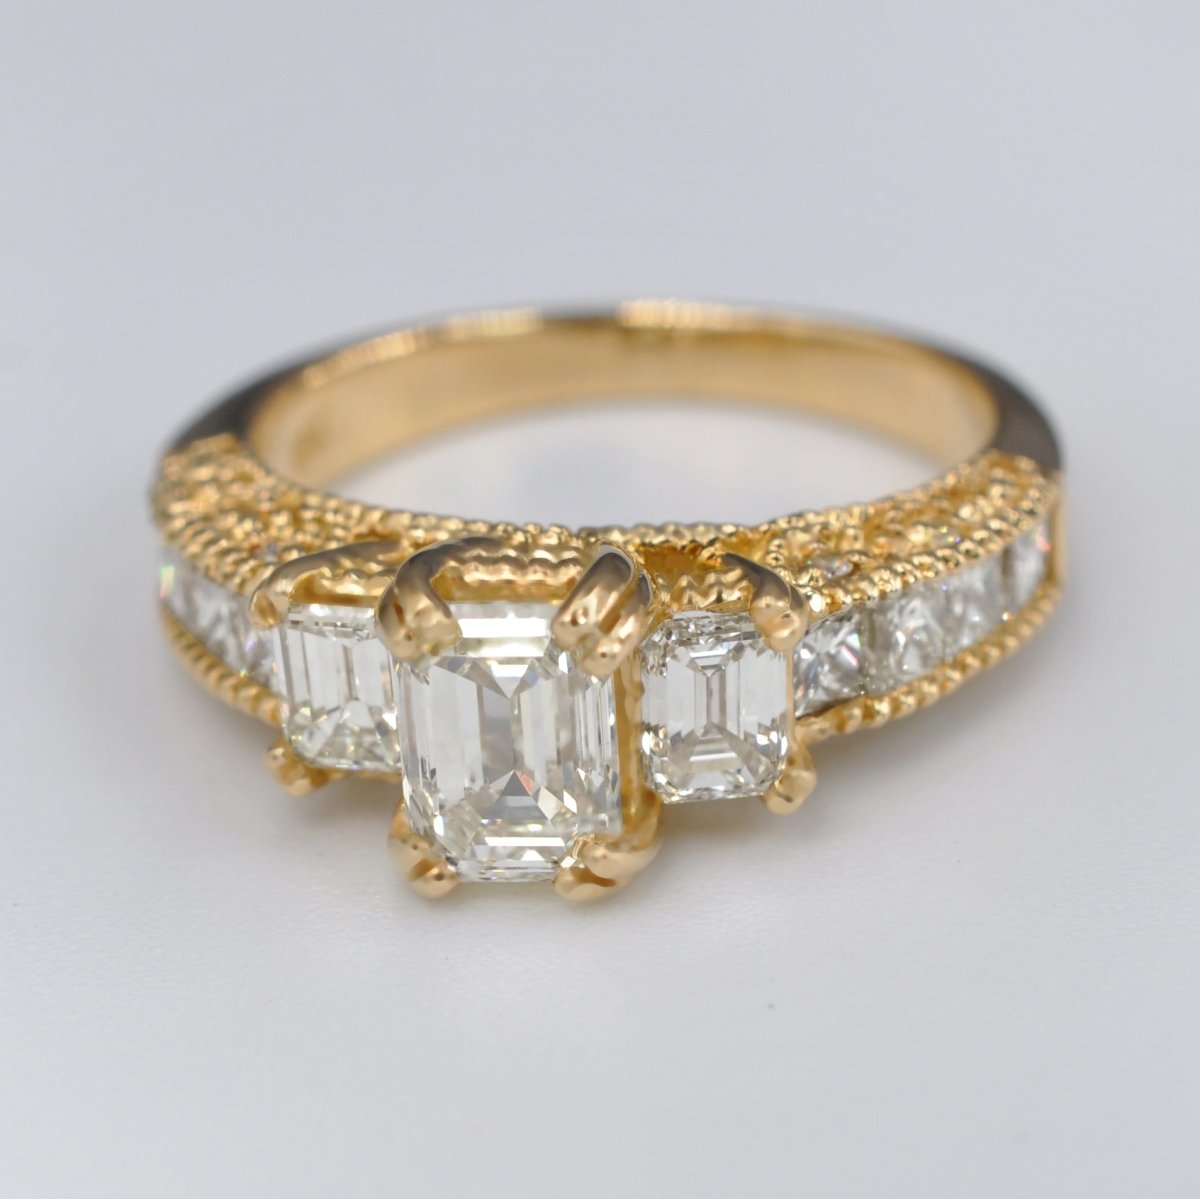 Prestige 2.60 CT Emerald, Princess, and Round Cut Diamond Engagement Ring in 18KT Yellow Gold - Primestyle.com